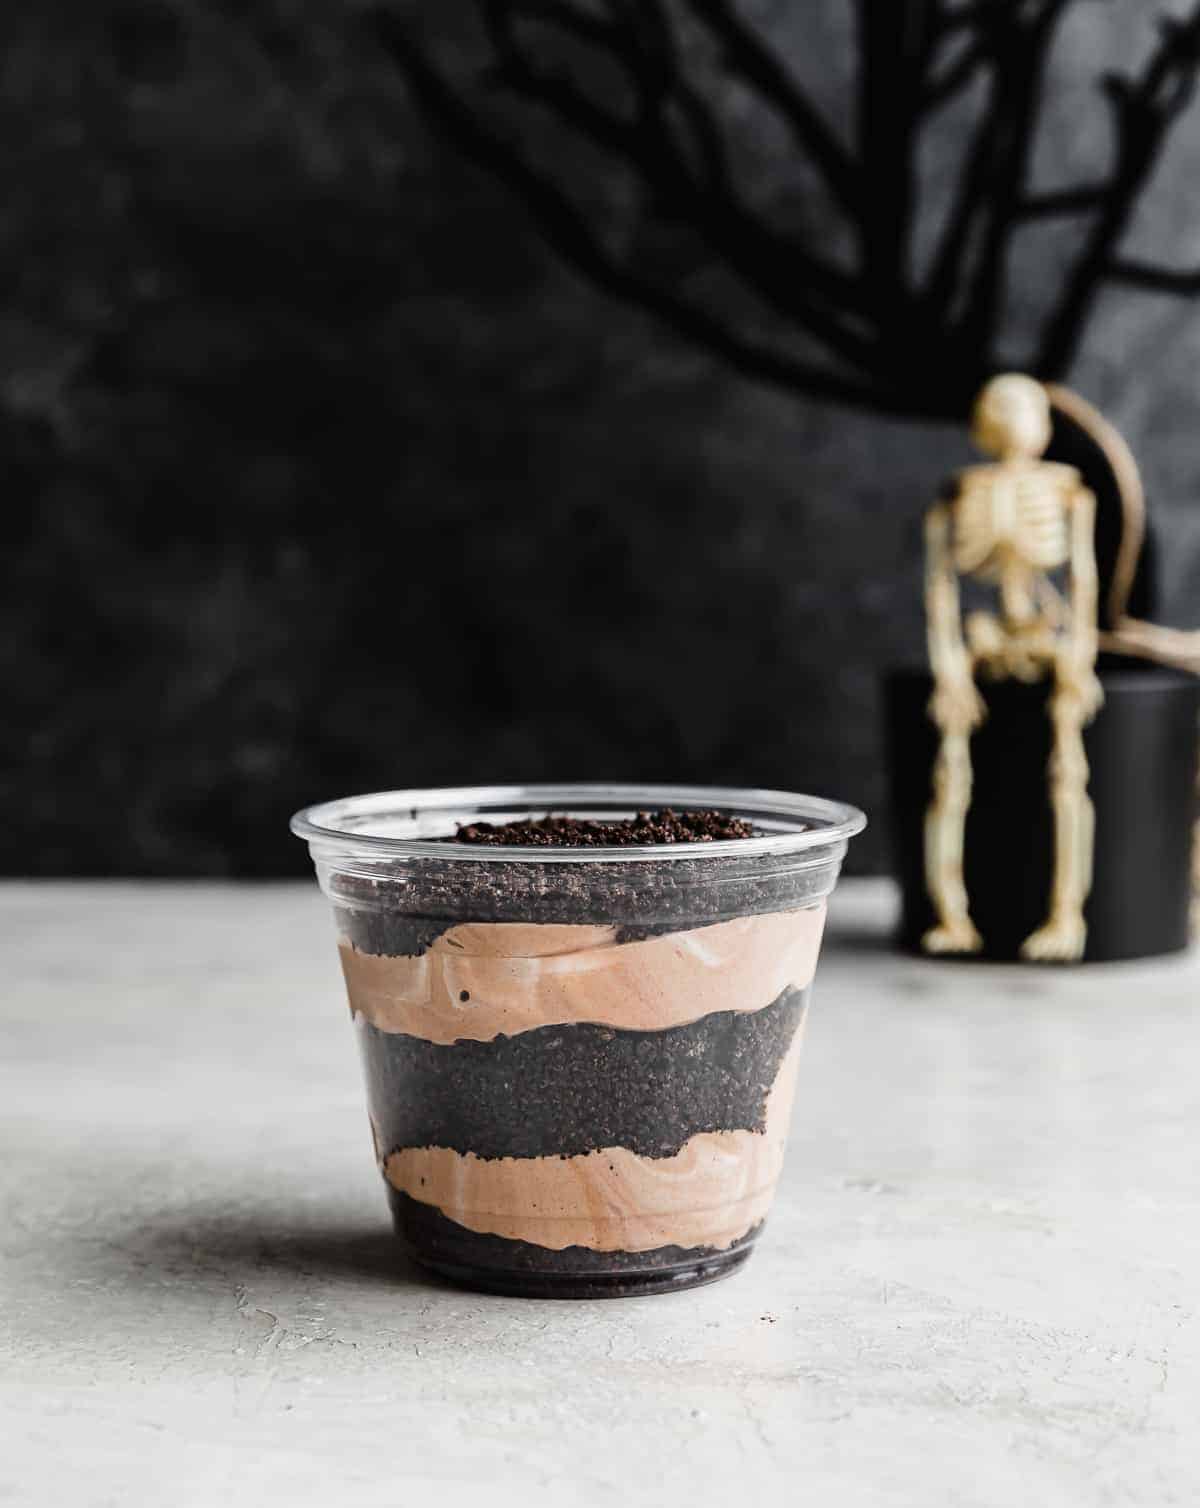 Halloween Dirt Cups featuring alternating layers of Oreo crumbs and chocolate pudding.